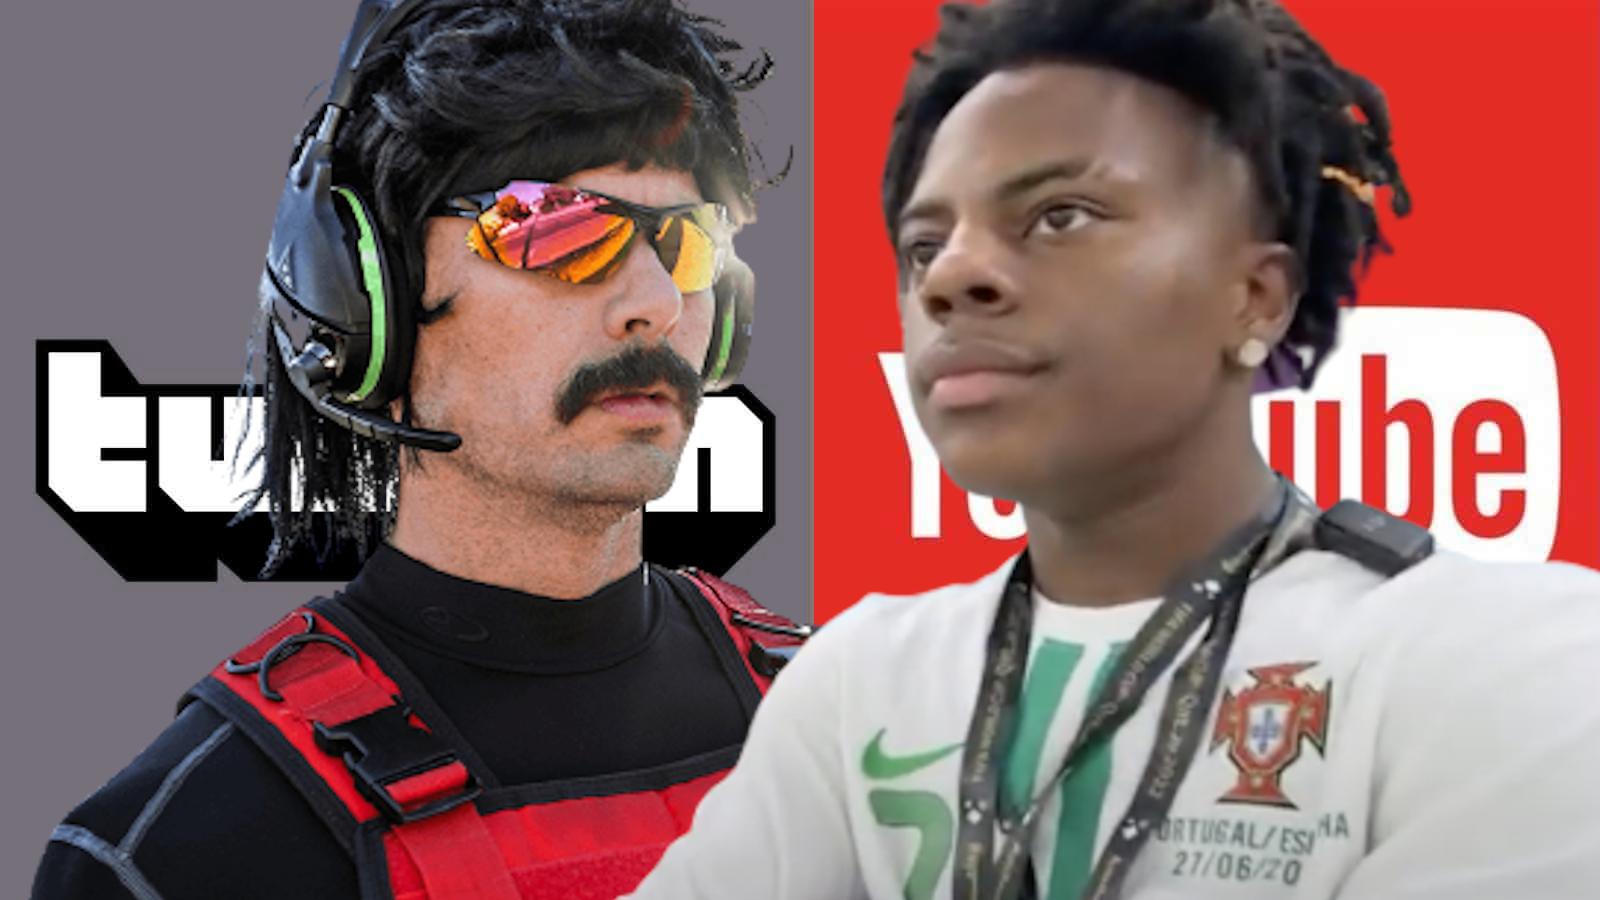 dr disrespect and ishowspeed banned on twitch